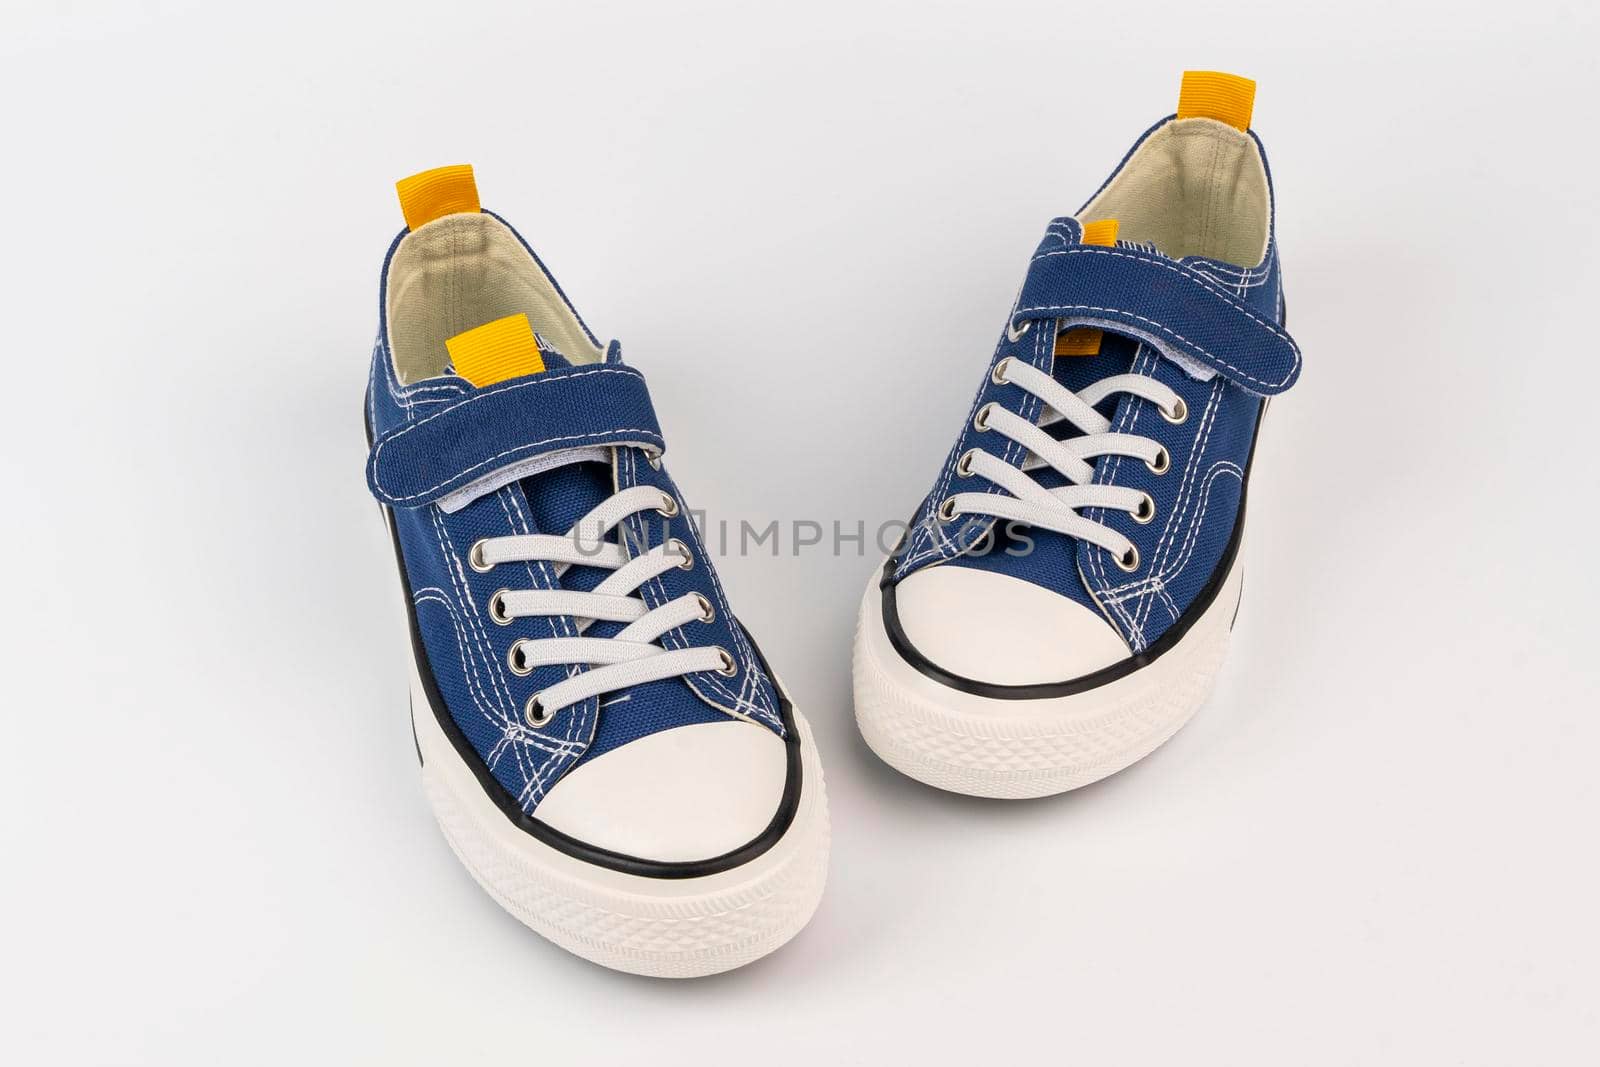 a pair of blue sneakers on a white background. Fashionable youth shoes by audiznam2609